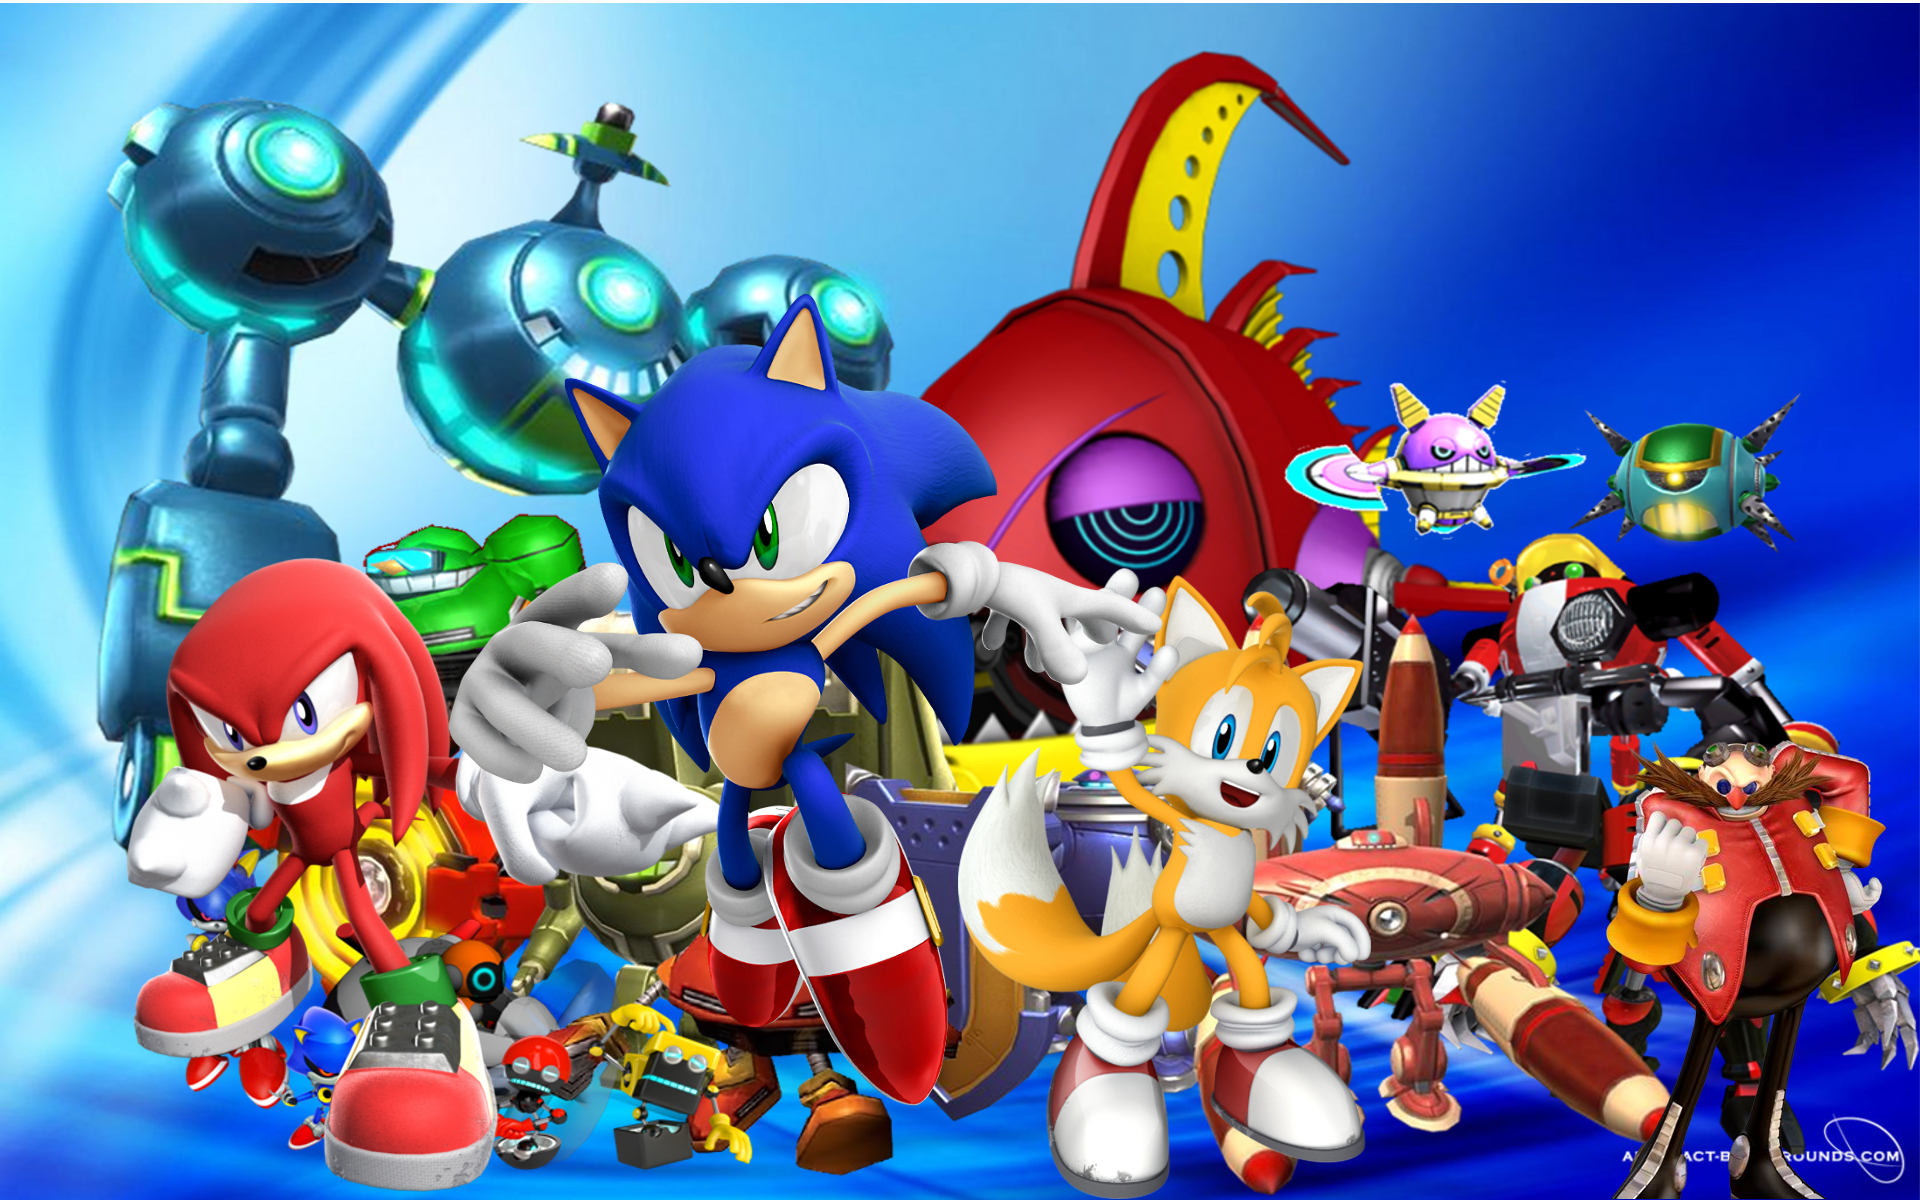 Free Download Sonic Wallpapers 19x10 For Your Desktop Mobile Tablet Explore 76 Sonic Wallpaper Super Sonic Wallpaper Sonic Hd Wallpaper Classic Sonic Wallpaper